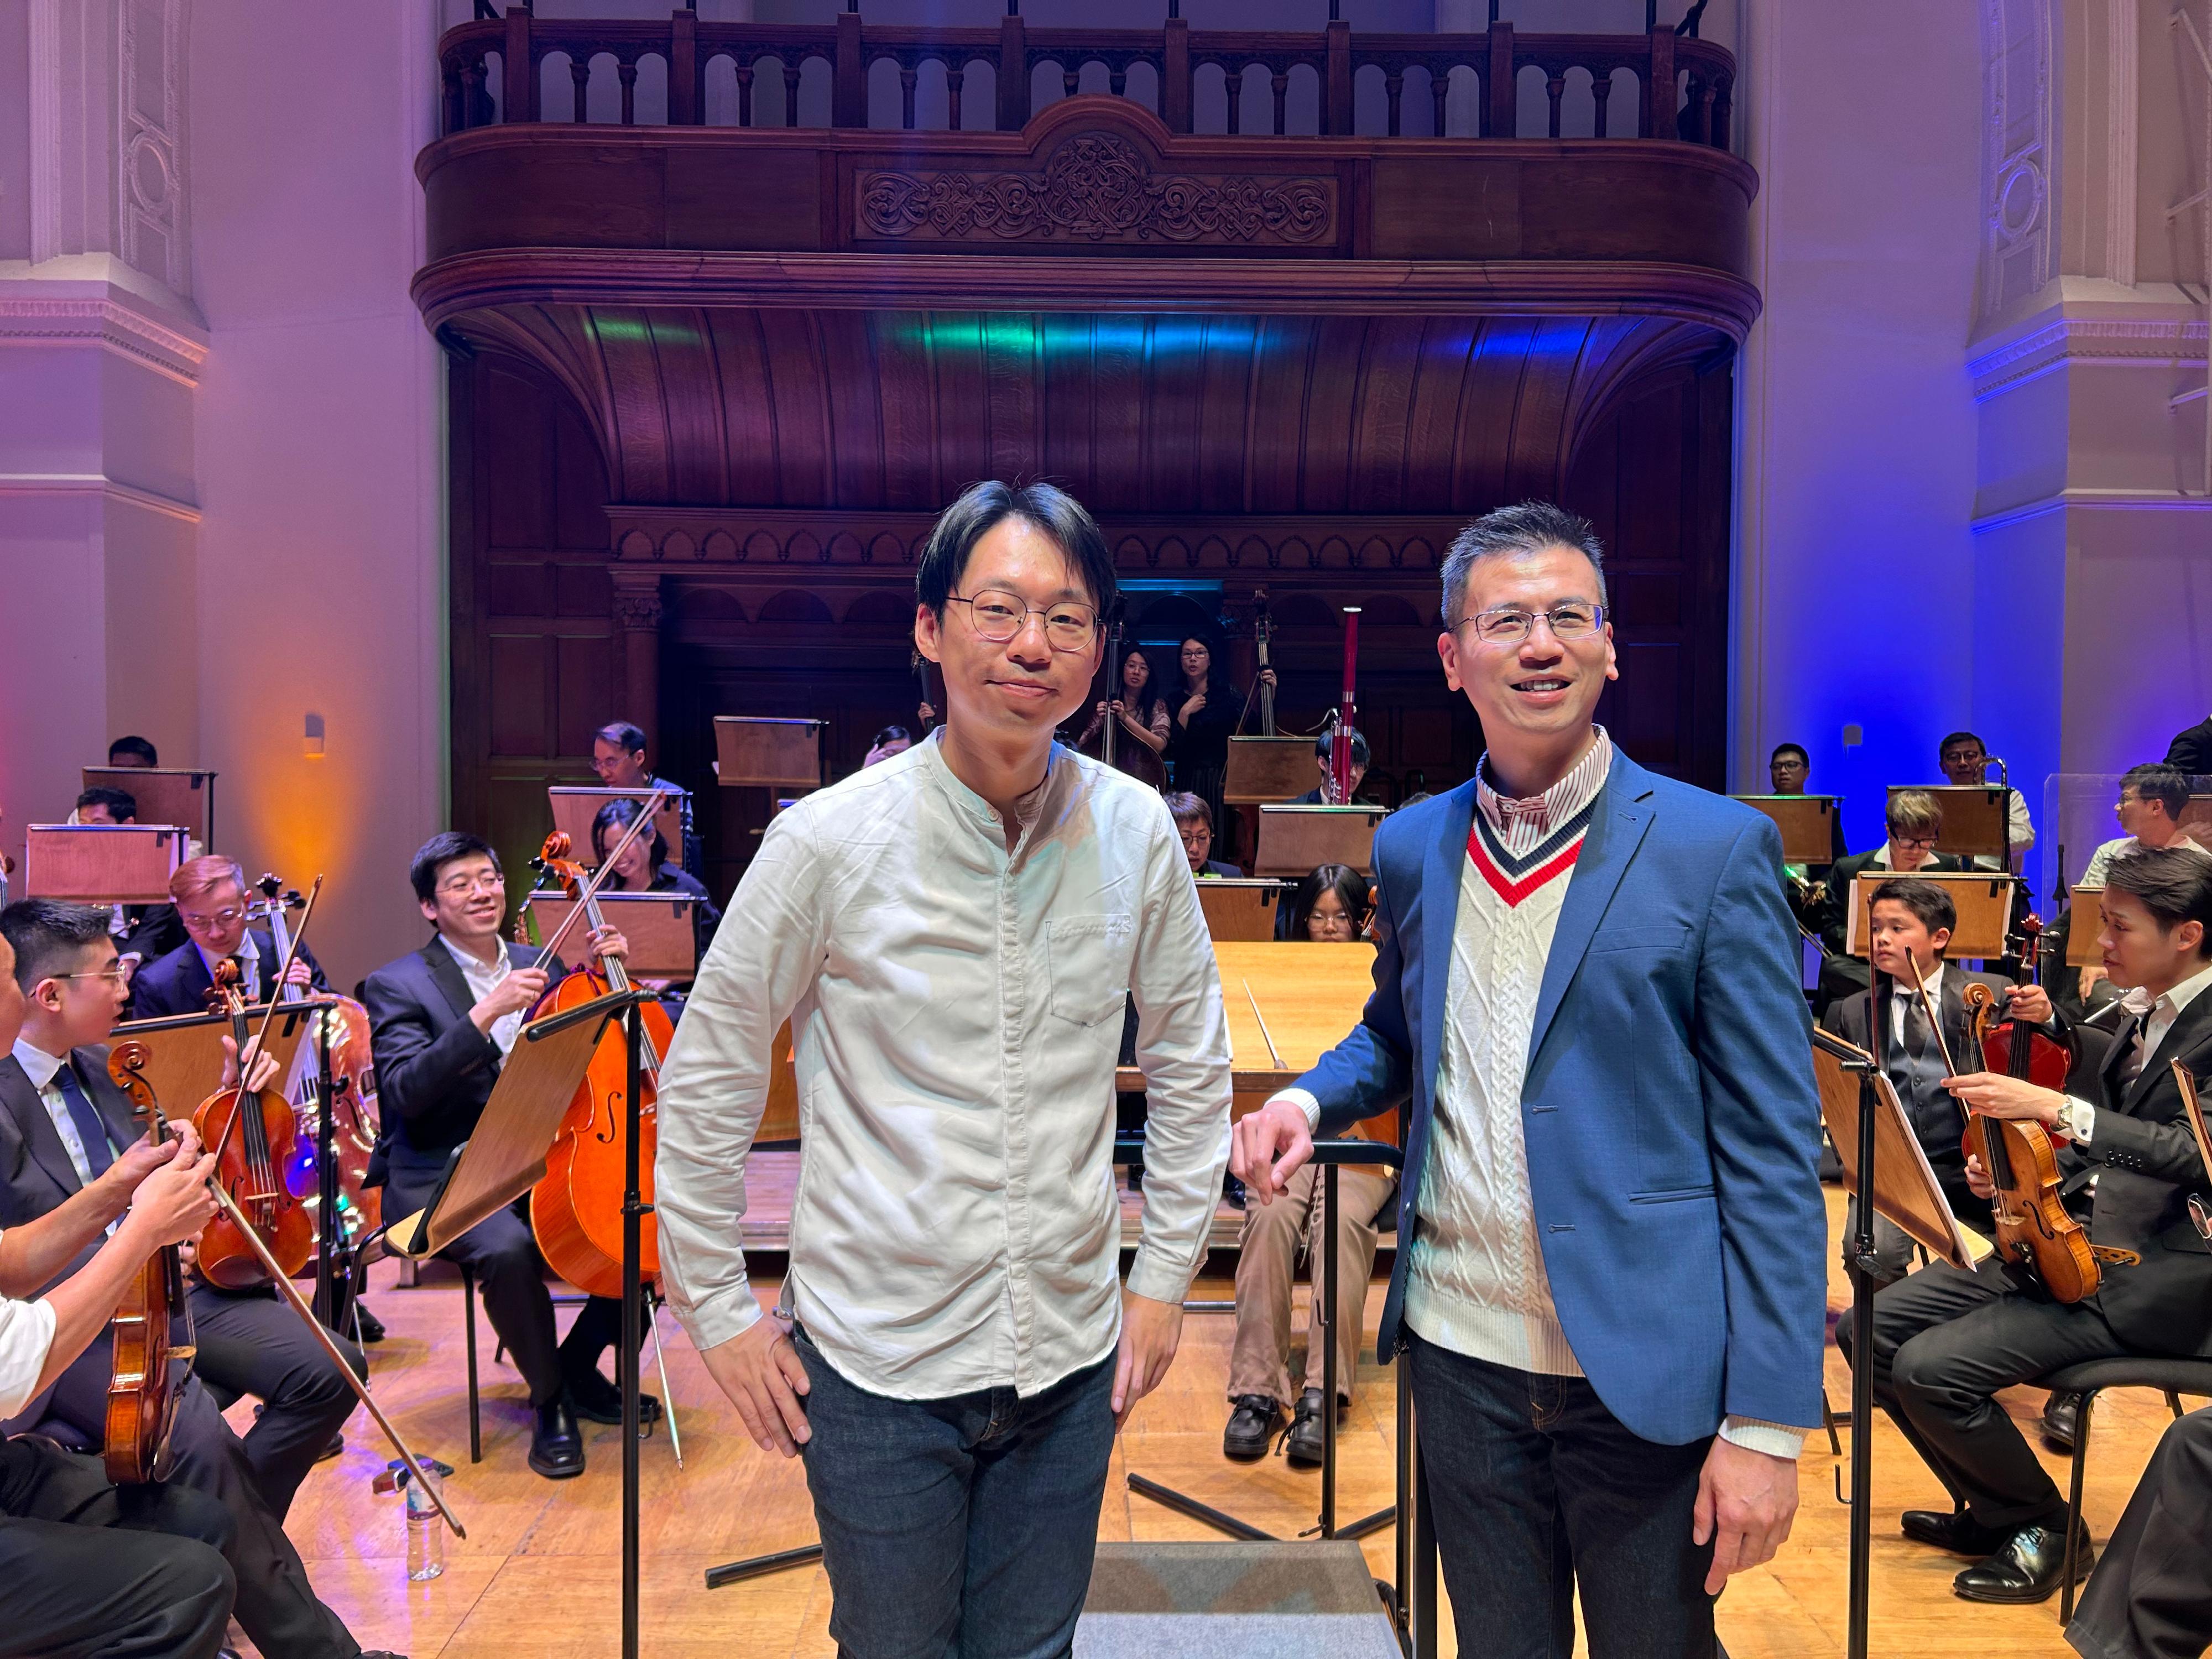 The Hong Kong Economic and Trade Office, London (London ETO) supported the concert staged by the Ponte London Orchestra at Cadogan Hall, London on May 21 (London time), showcasing a variety of theme music from Hong Kong movies across generations. Photo shows the Director-General of London ETO, Mr Gilford Law (right), and Principal Conductor Stephen Lam.